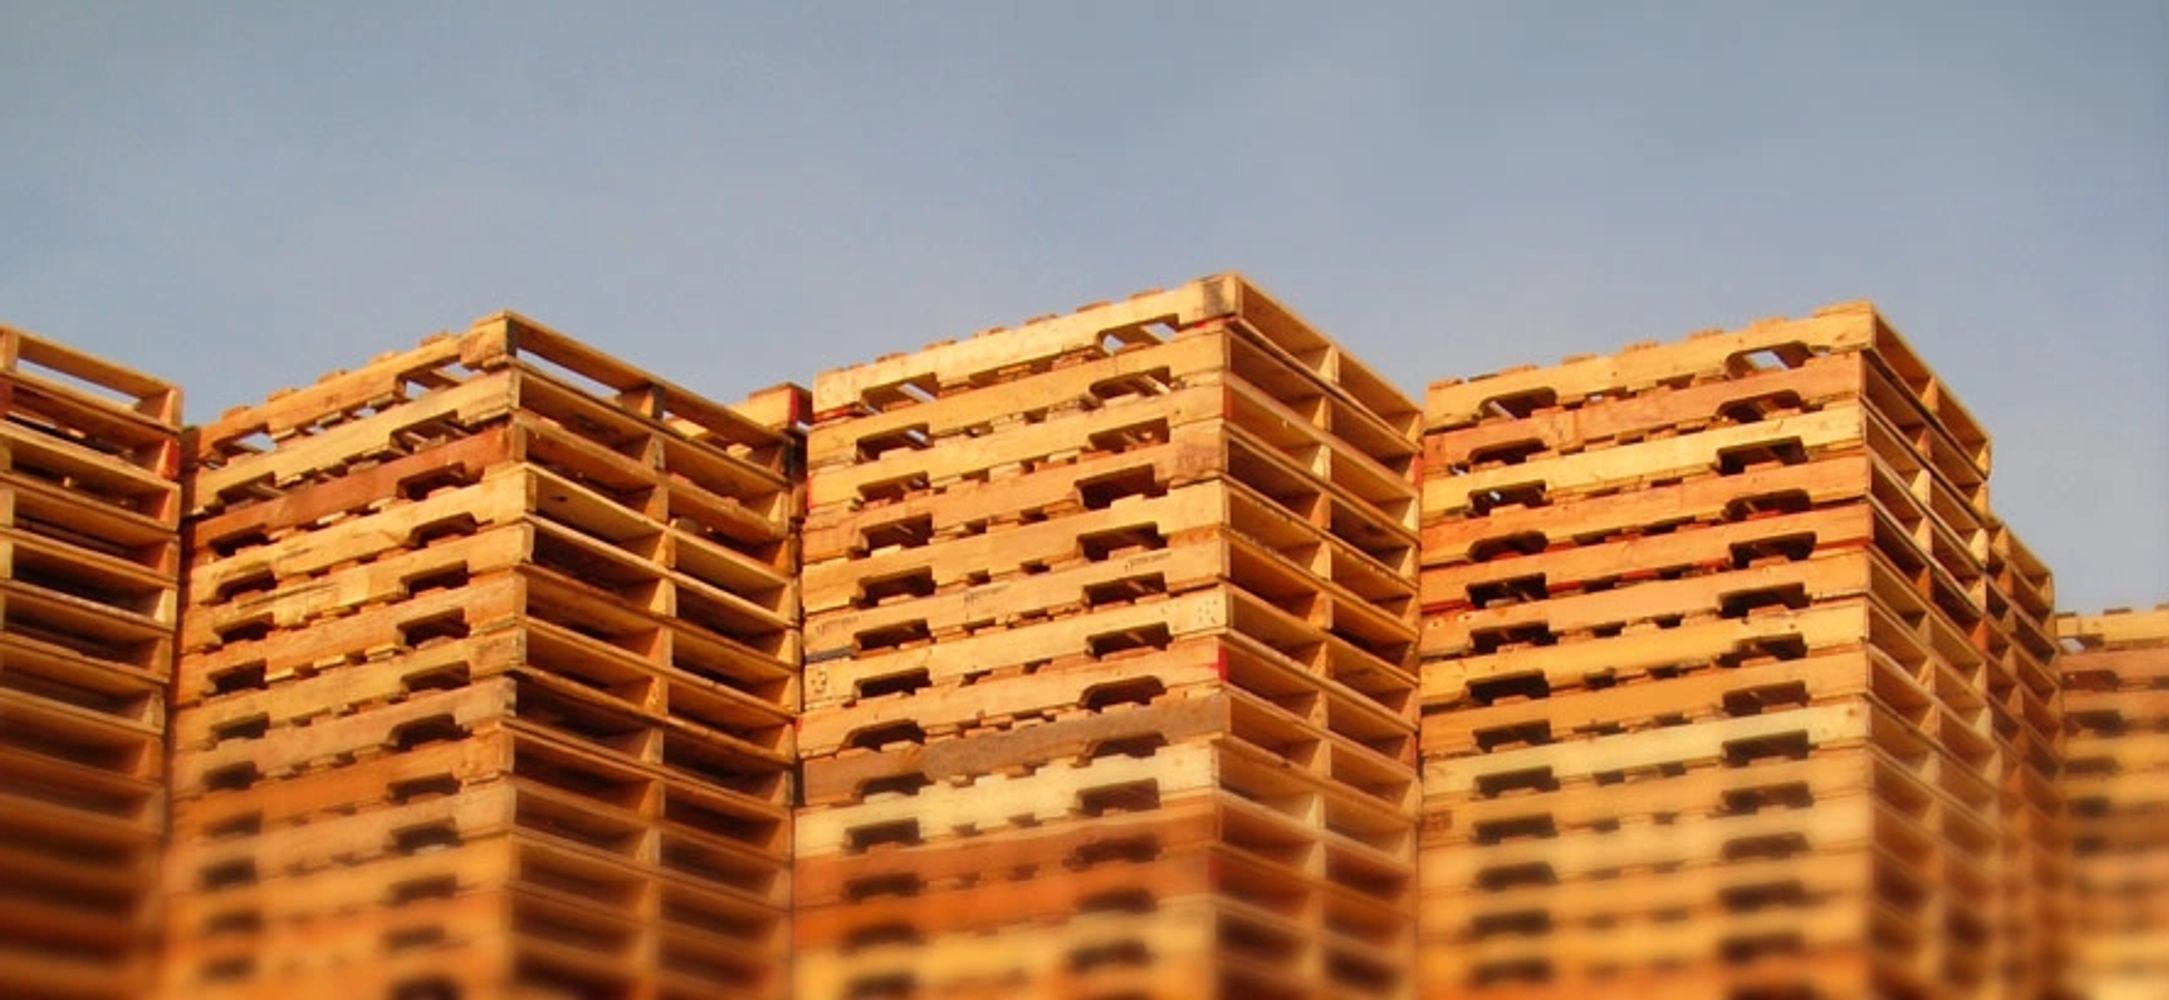 Crates of pallet supplies